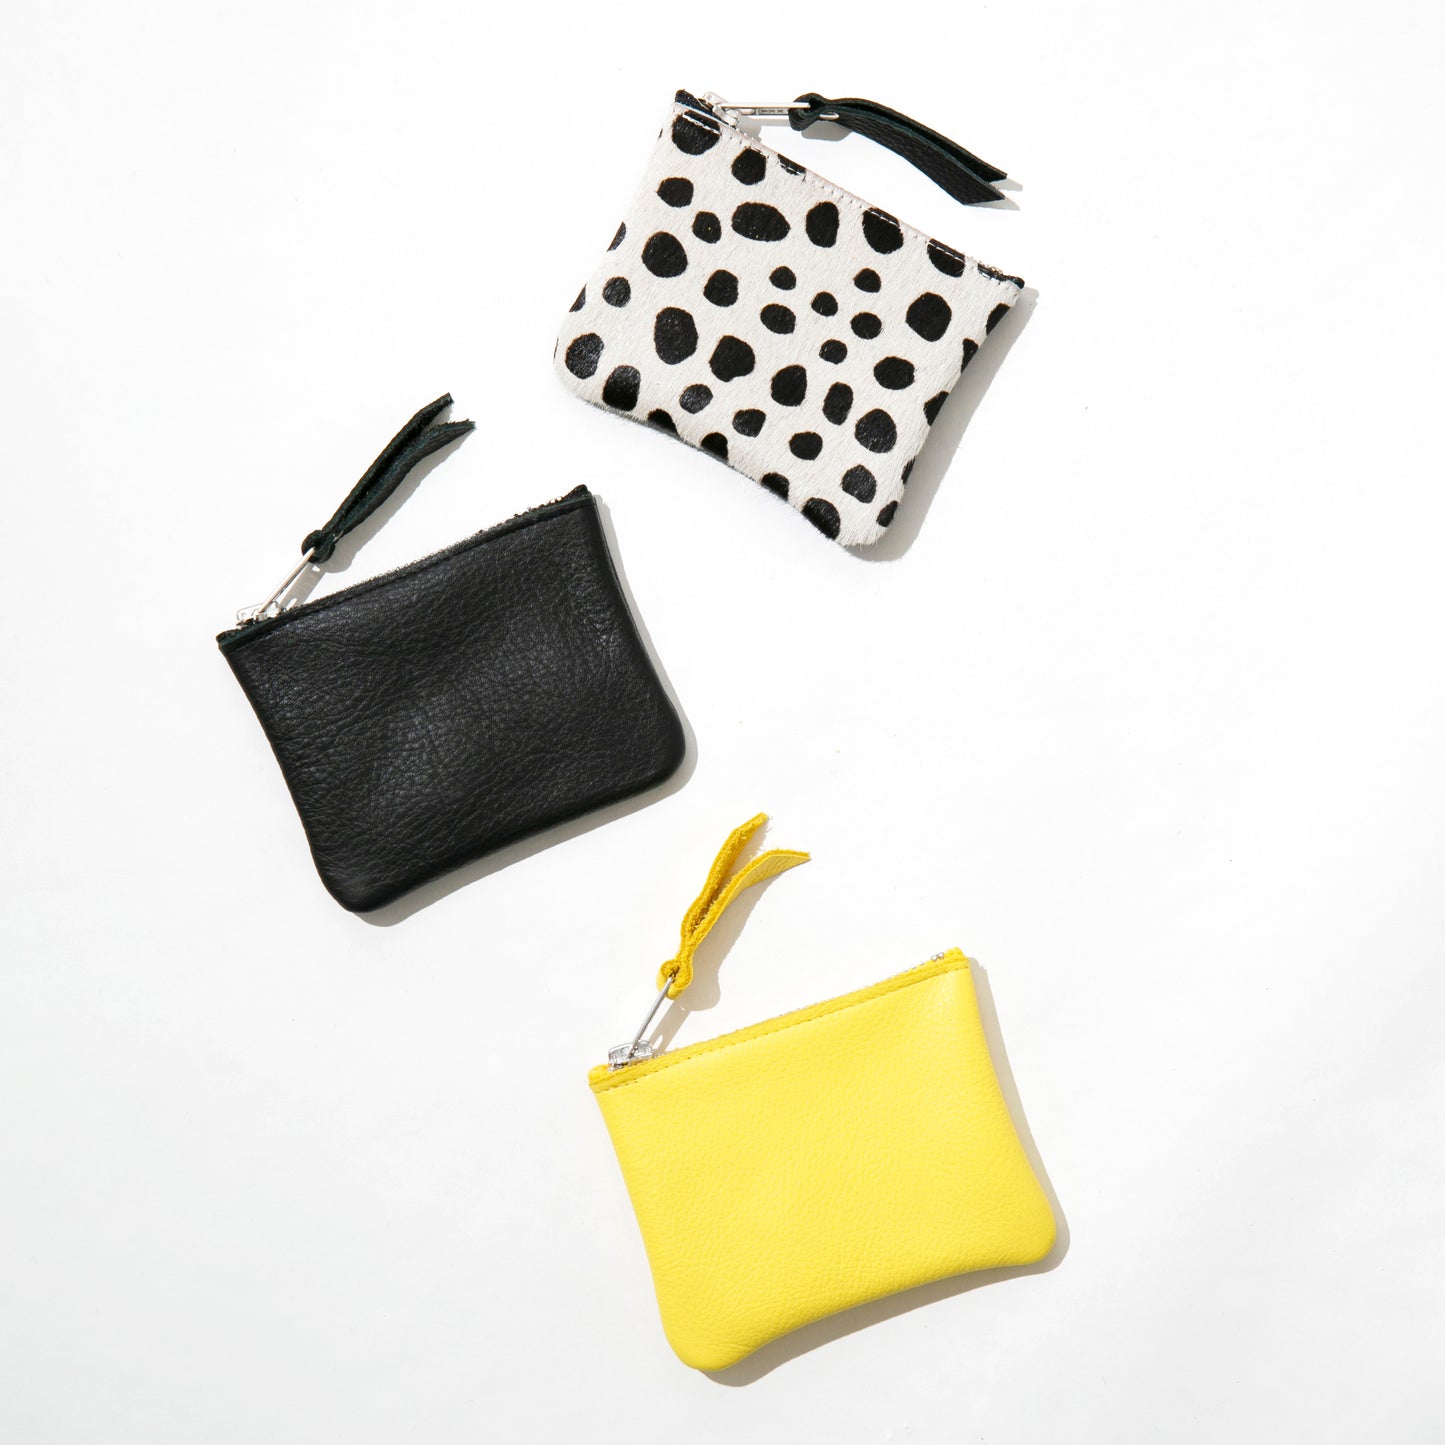 Spotty Leather Coin Purse